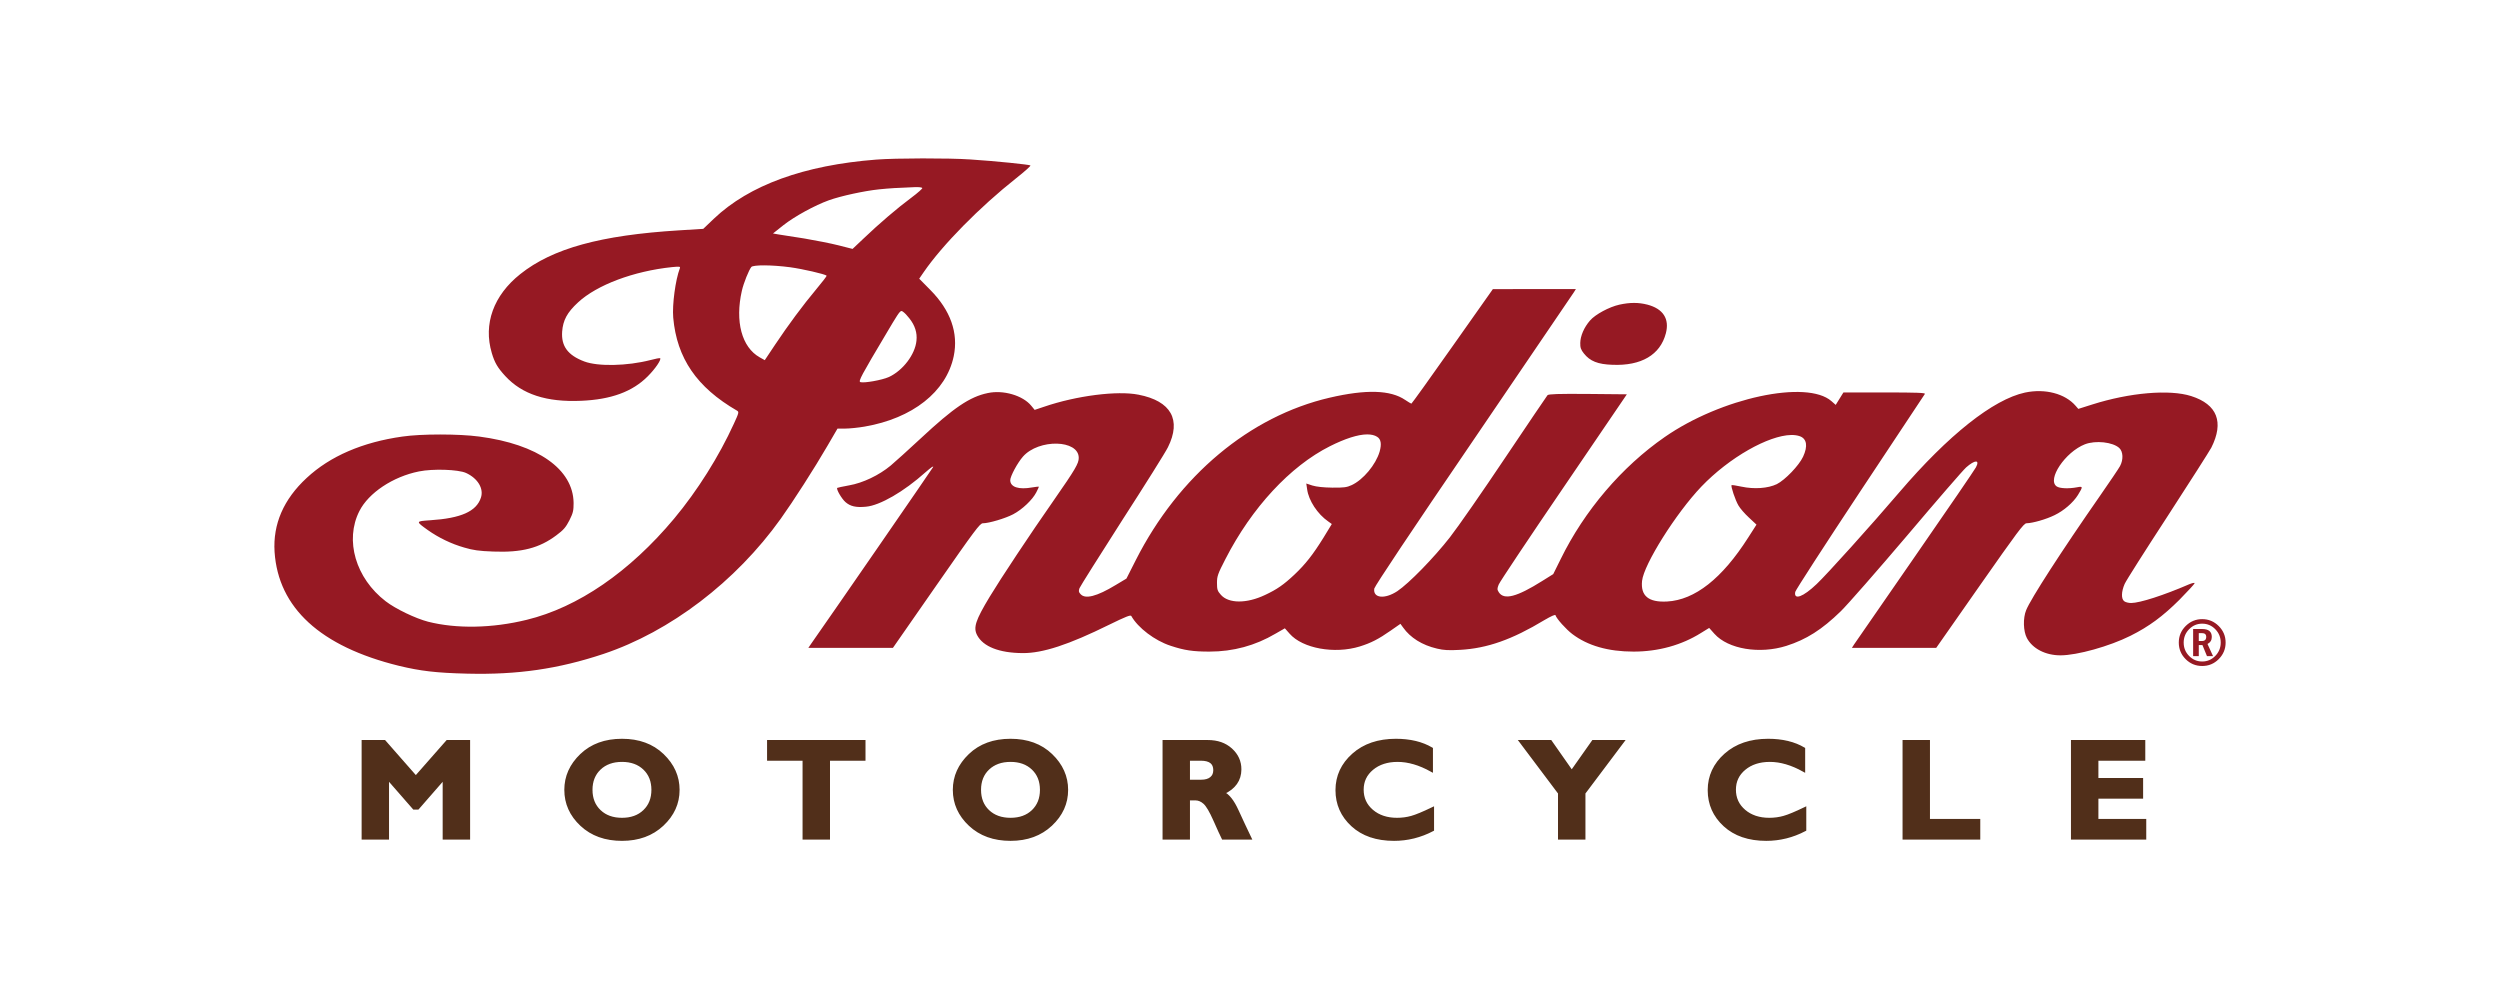 Motorcycle Brand Logo - Most Popular Motorcycle Brands Logos with Names